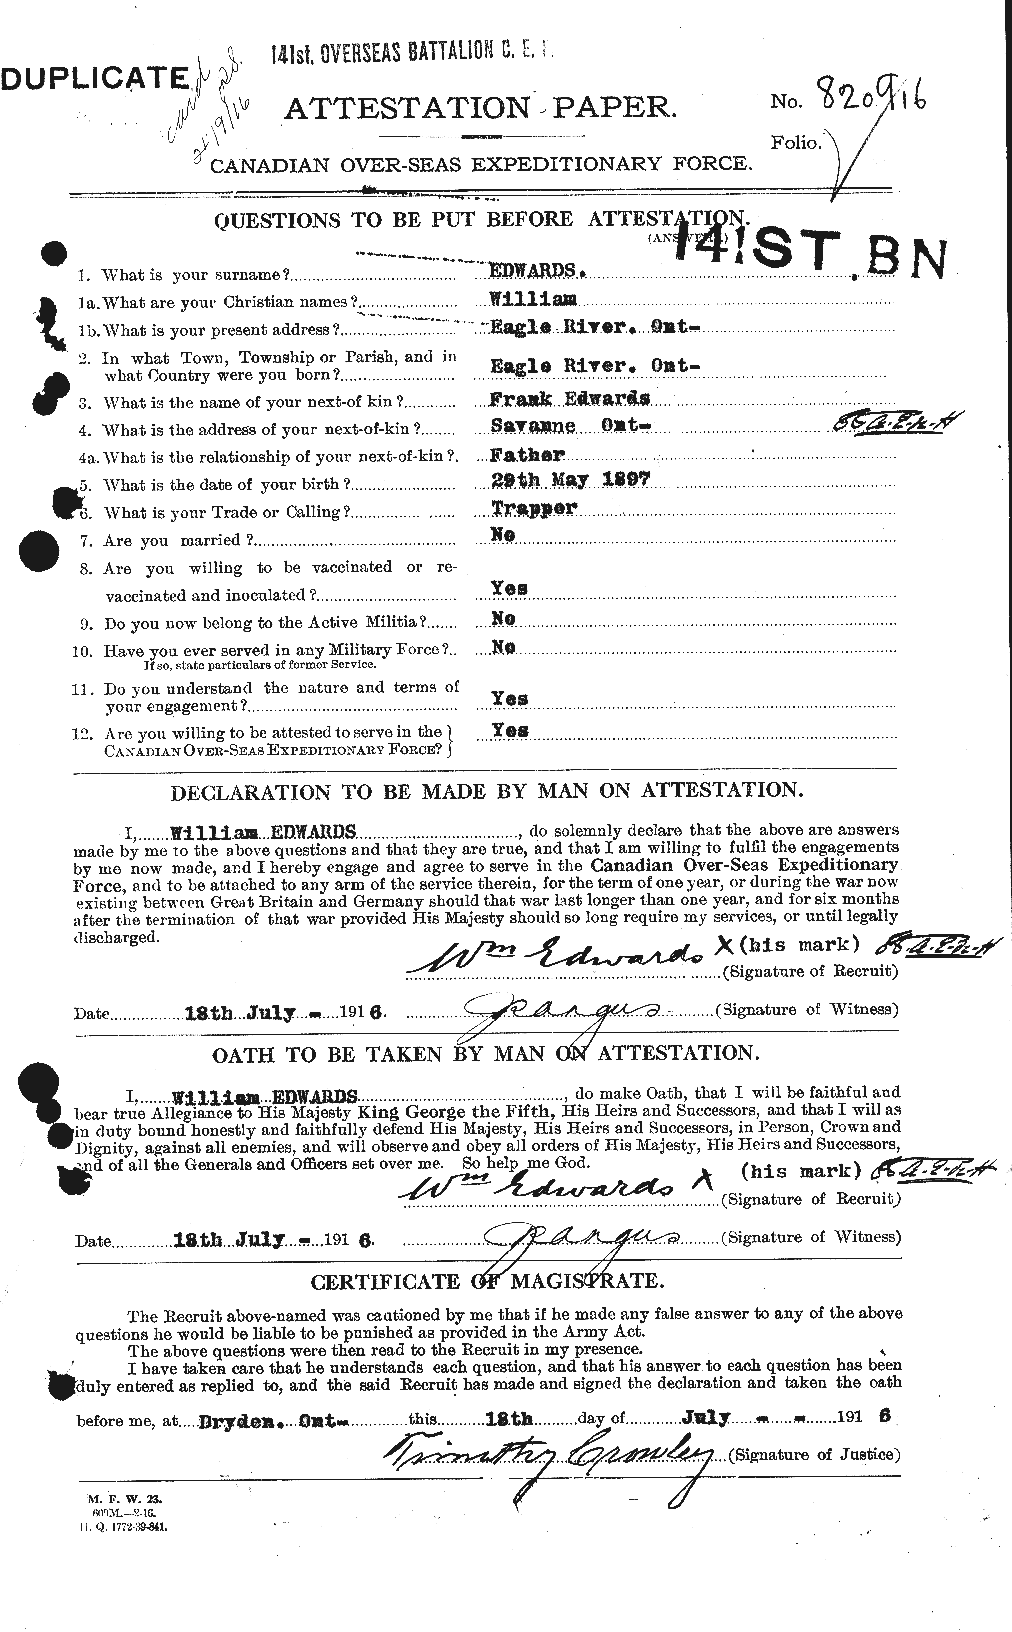 Personnel Records of the First World War - CEF 310390a